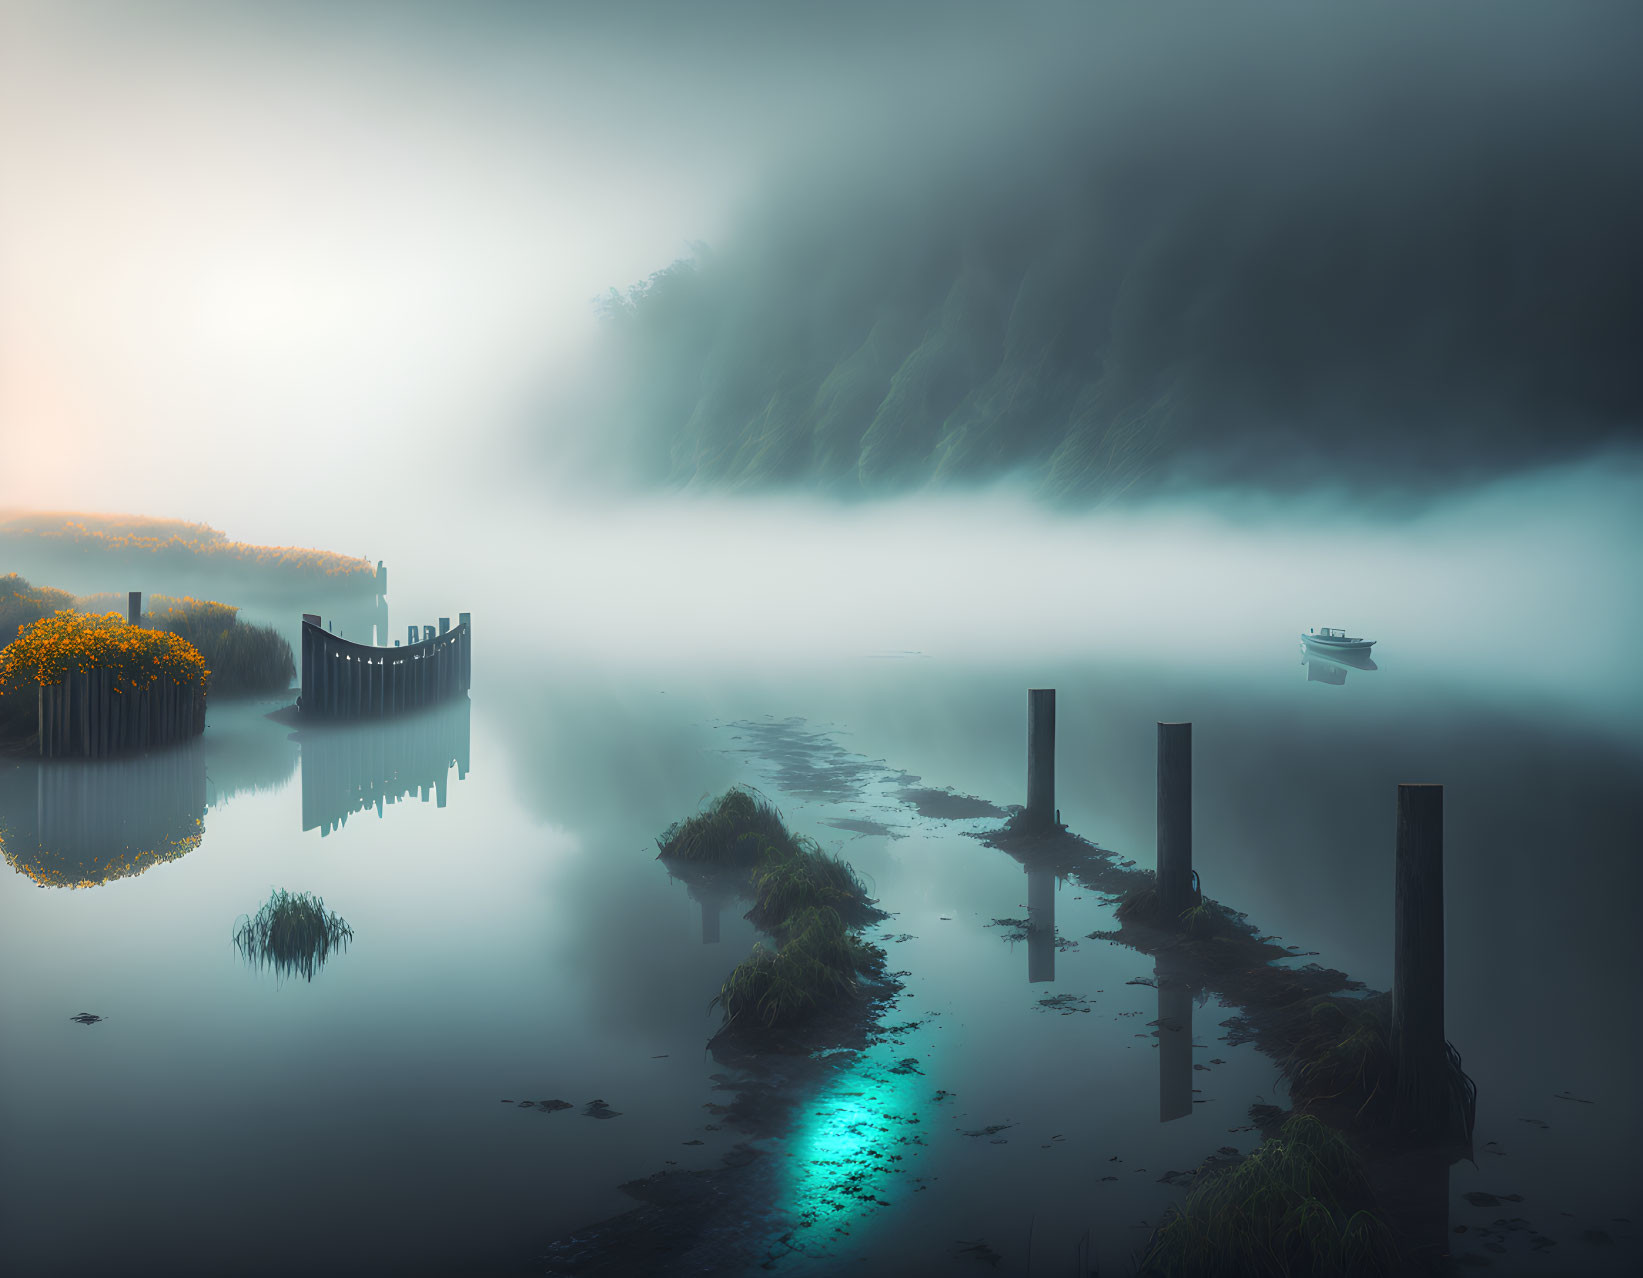 Foggy landscape with boat, dock, and lush greenery